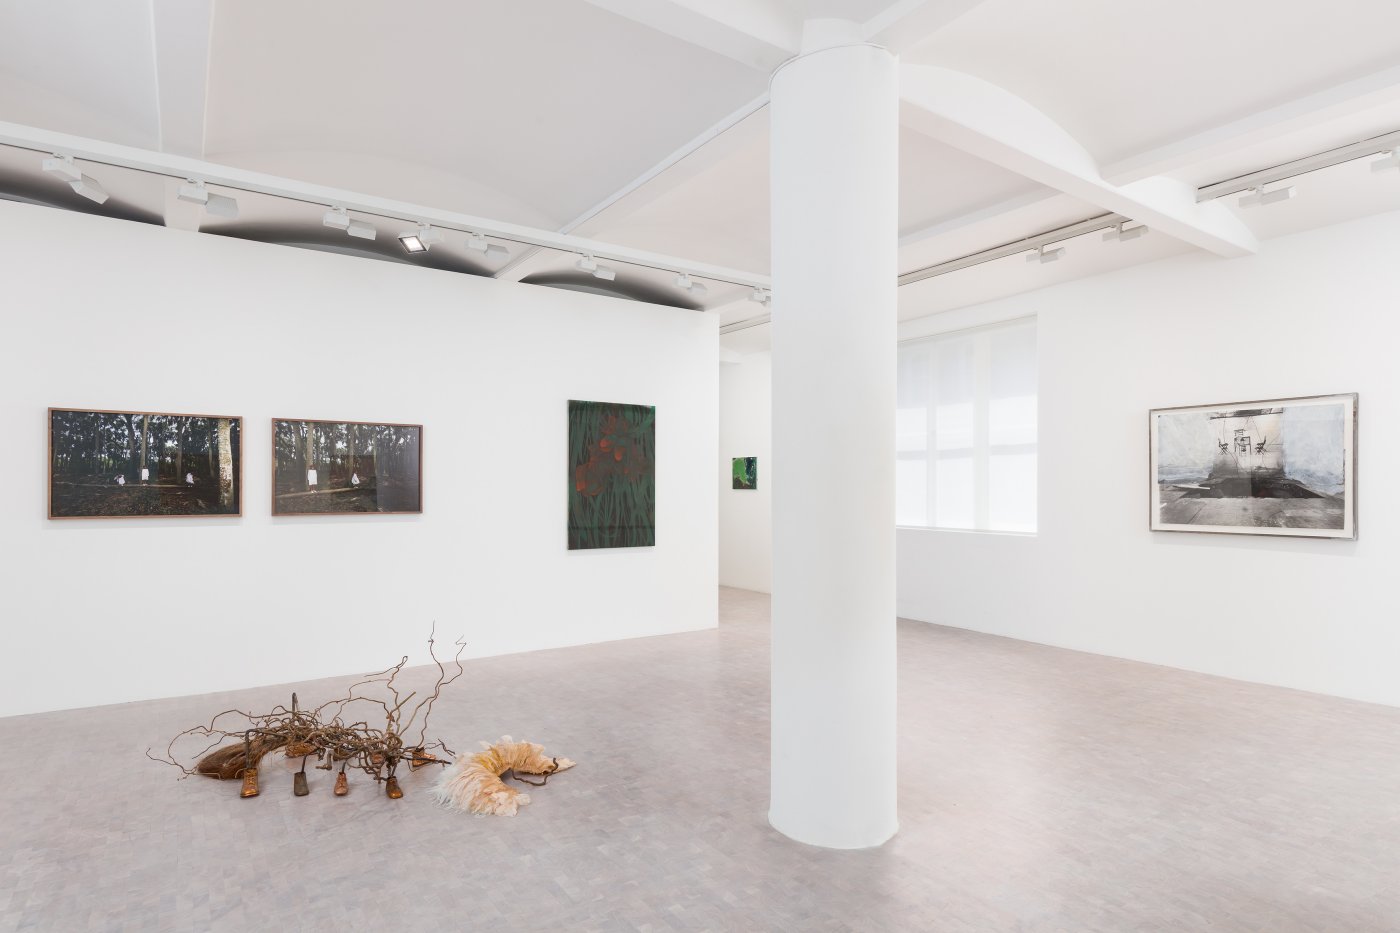 Installation image for Tales of Soil and Concrete, at Pippy Houldsworth Gallery